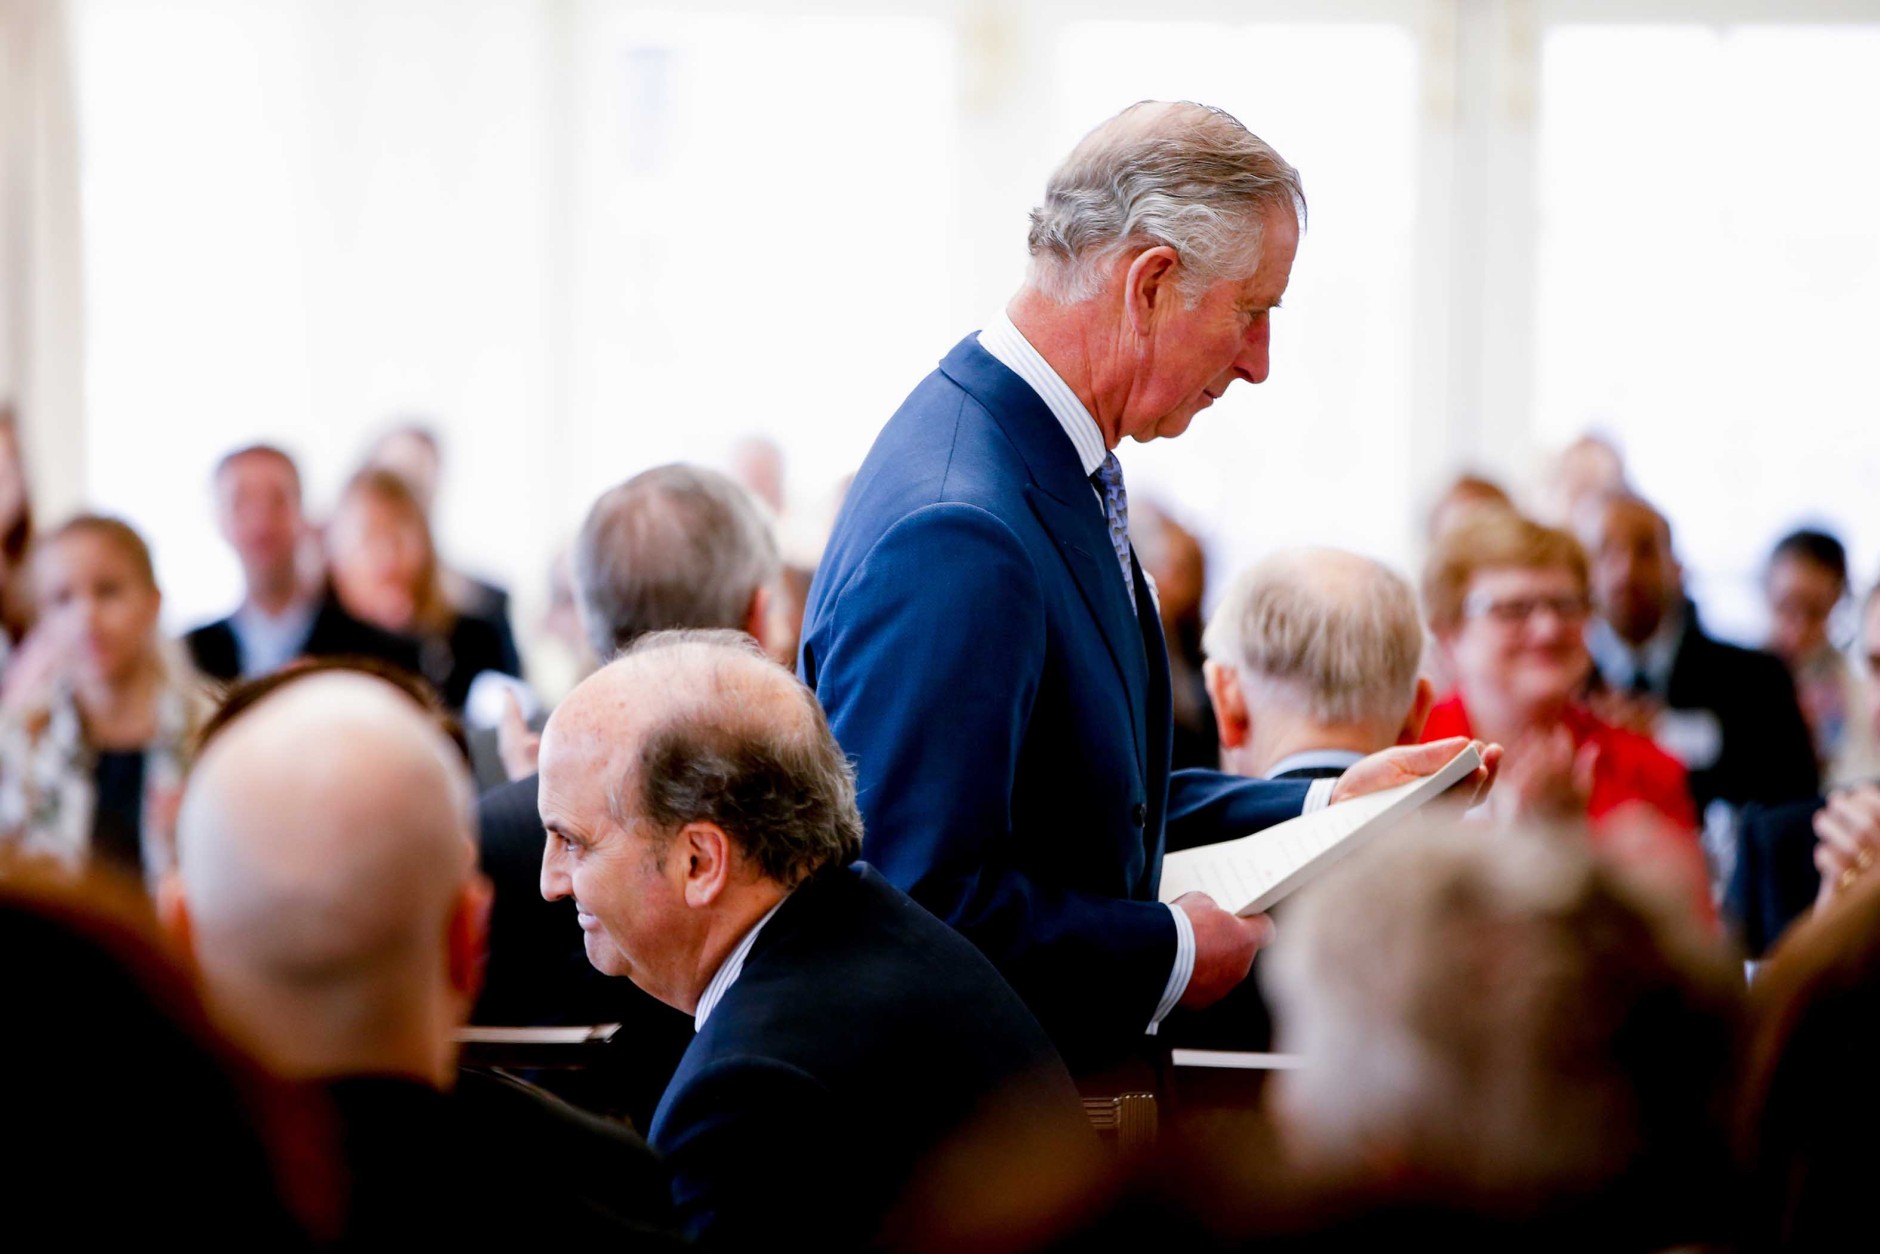 Britain’s Prince Charles returns to his seat after speaking at a meeting of companies, leading environmental organizations and government figures brought together to consider actions to address the threat posed by marine plastic waste, Wednesday, March 18, 2015, at the Hay Adams Hotel in Washington. (AP Photo/Andrew Harnik)